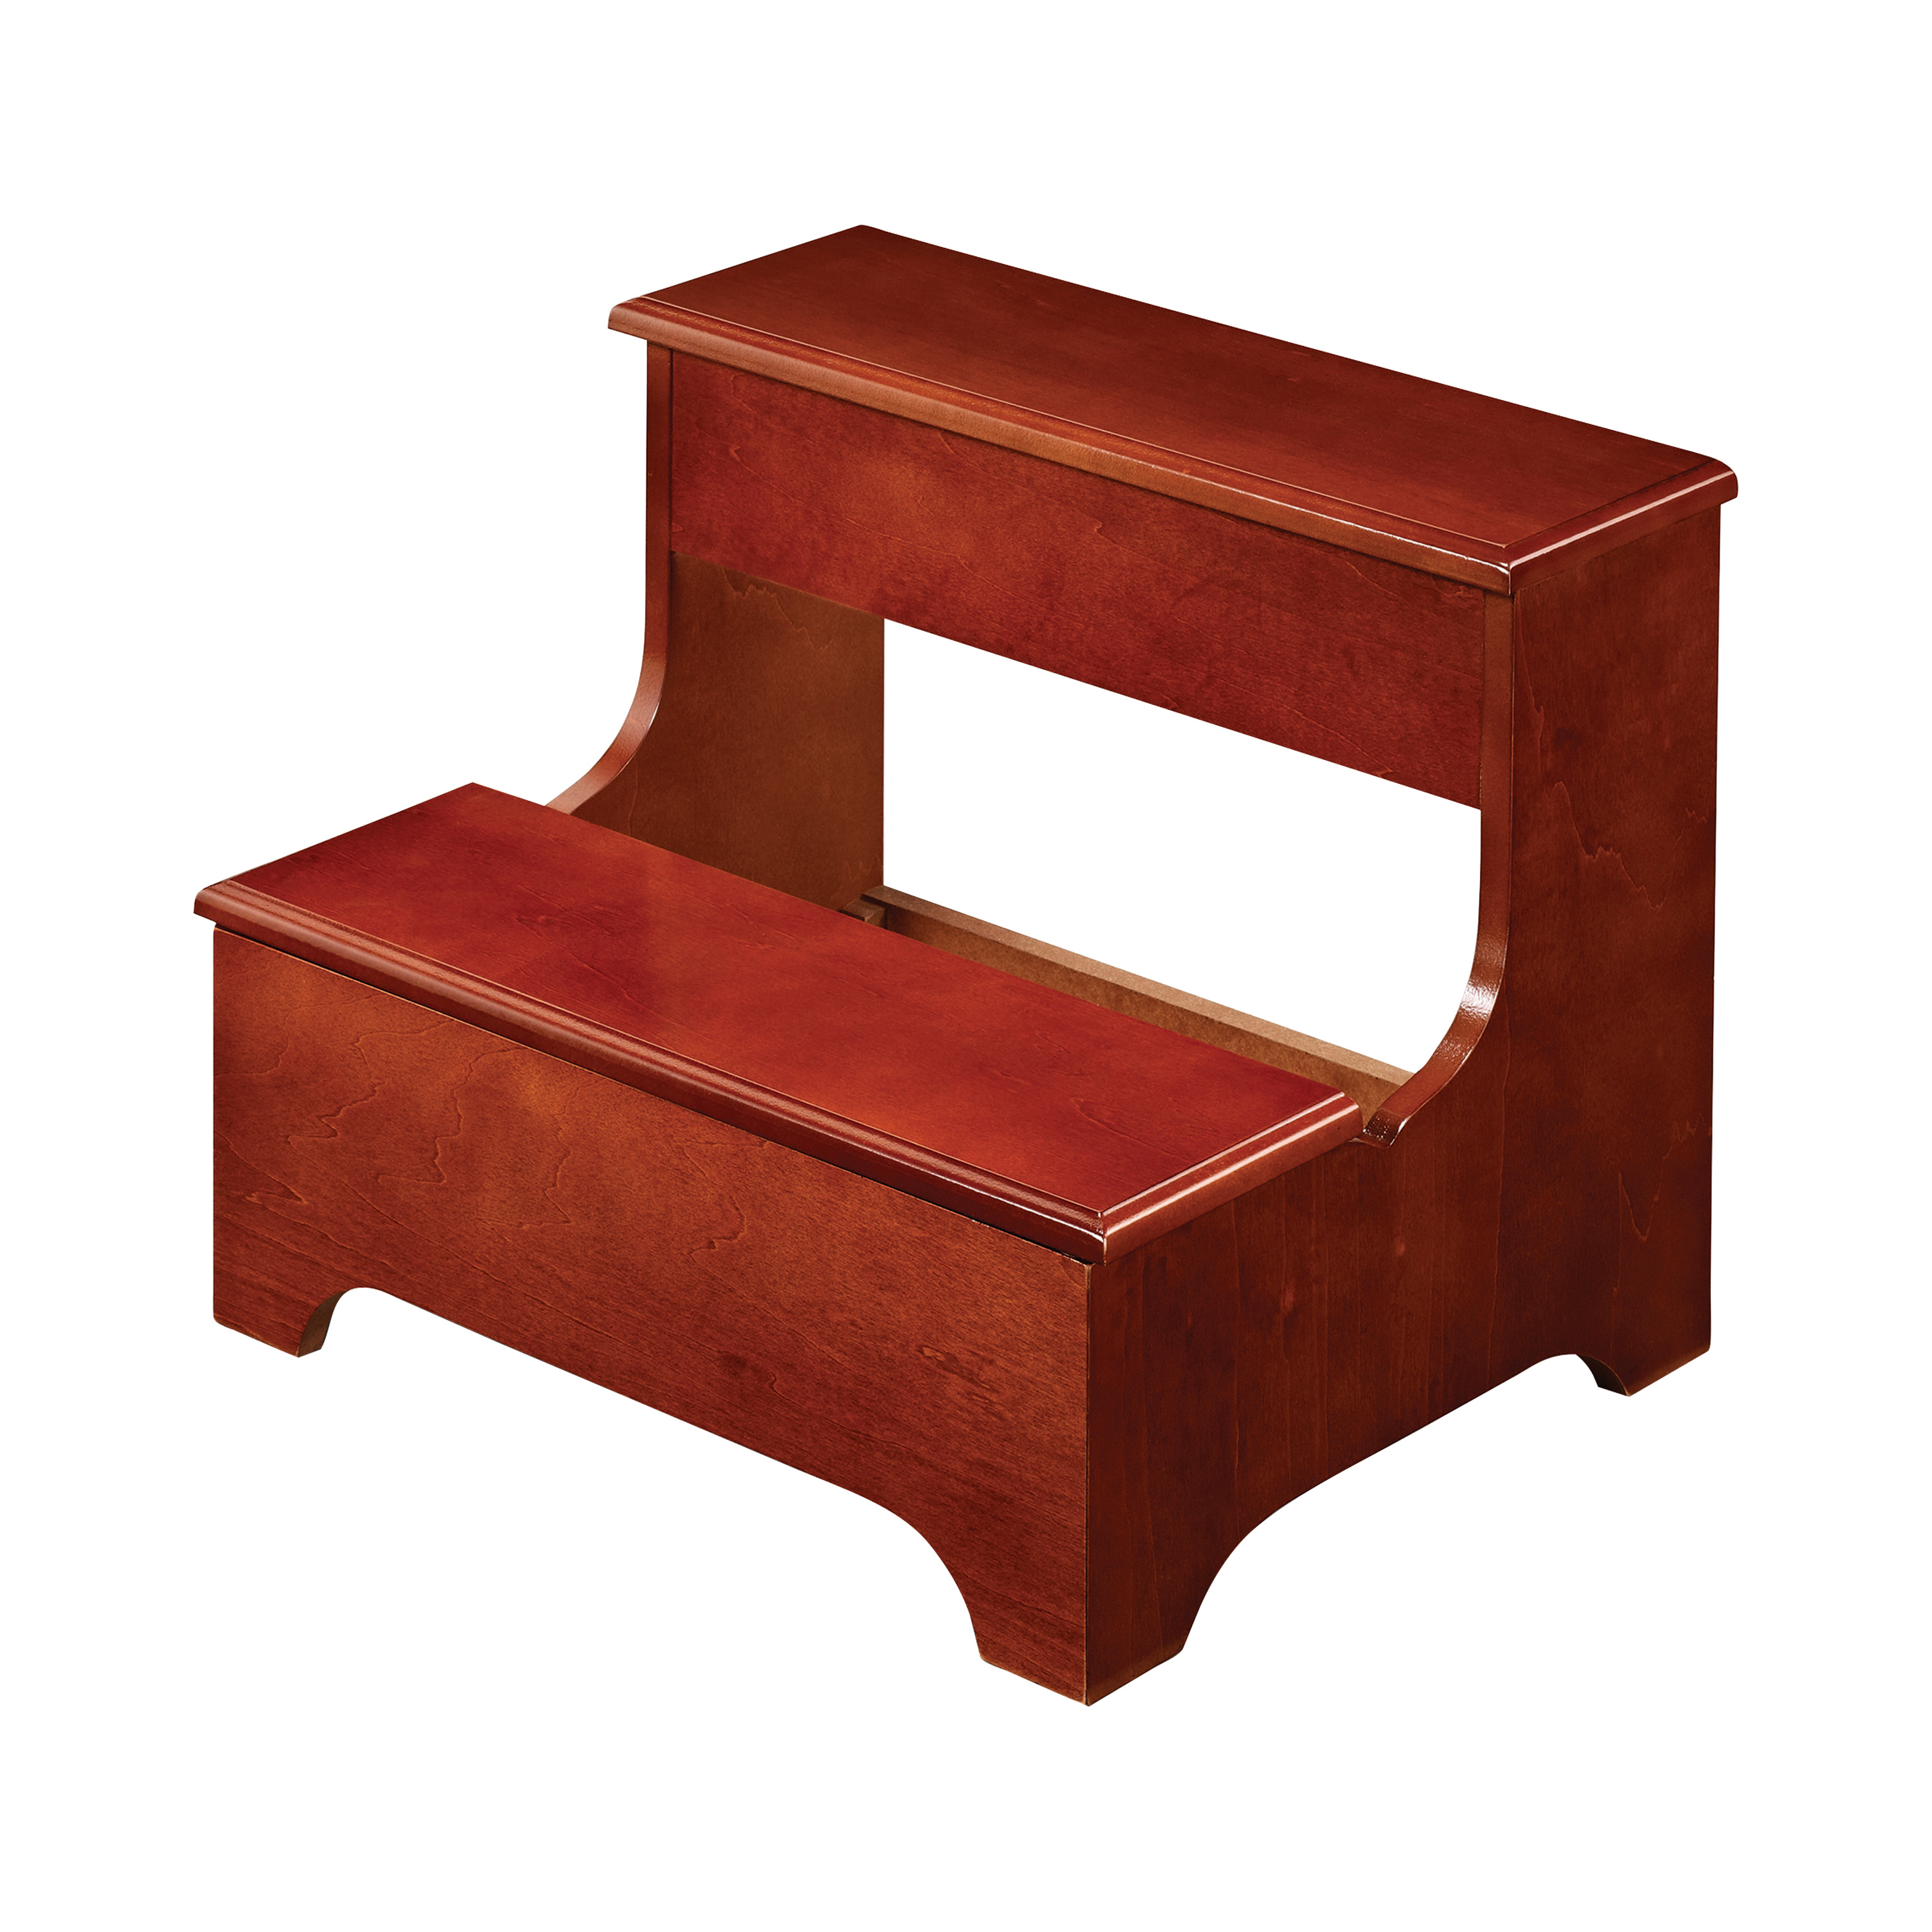 2-tier Step Stool With Hidden Storage Warm Brown - image 1 of 3